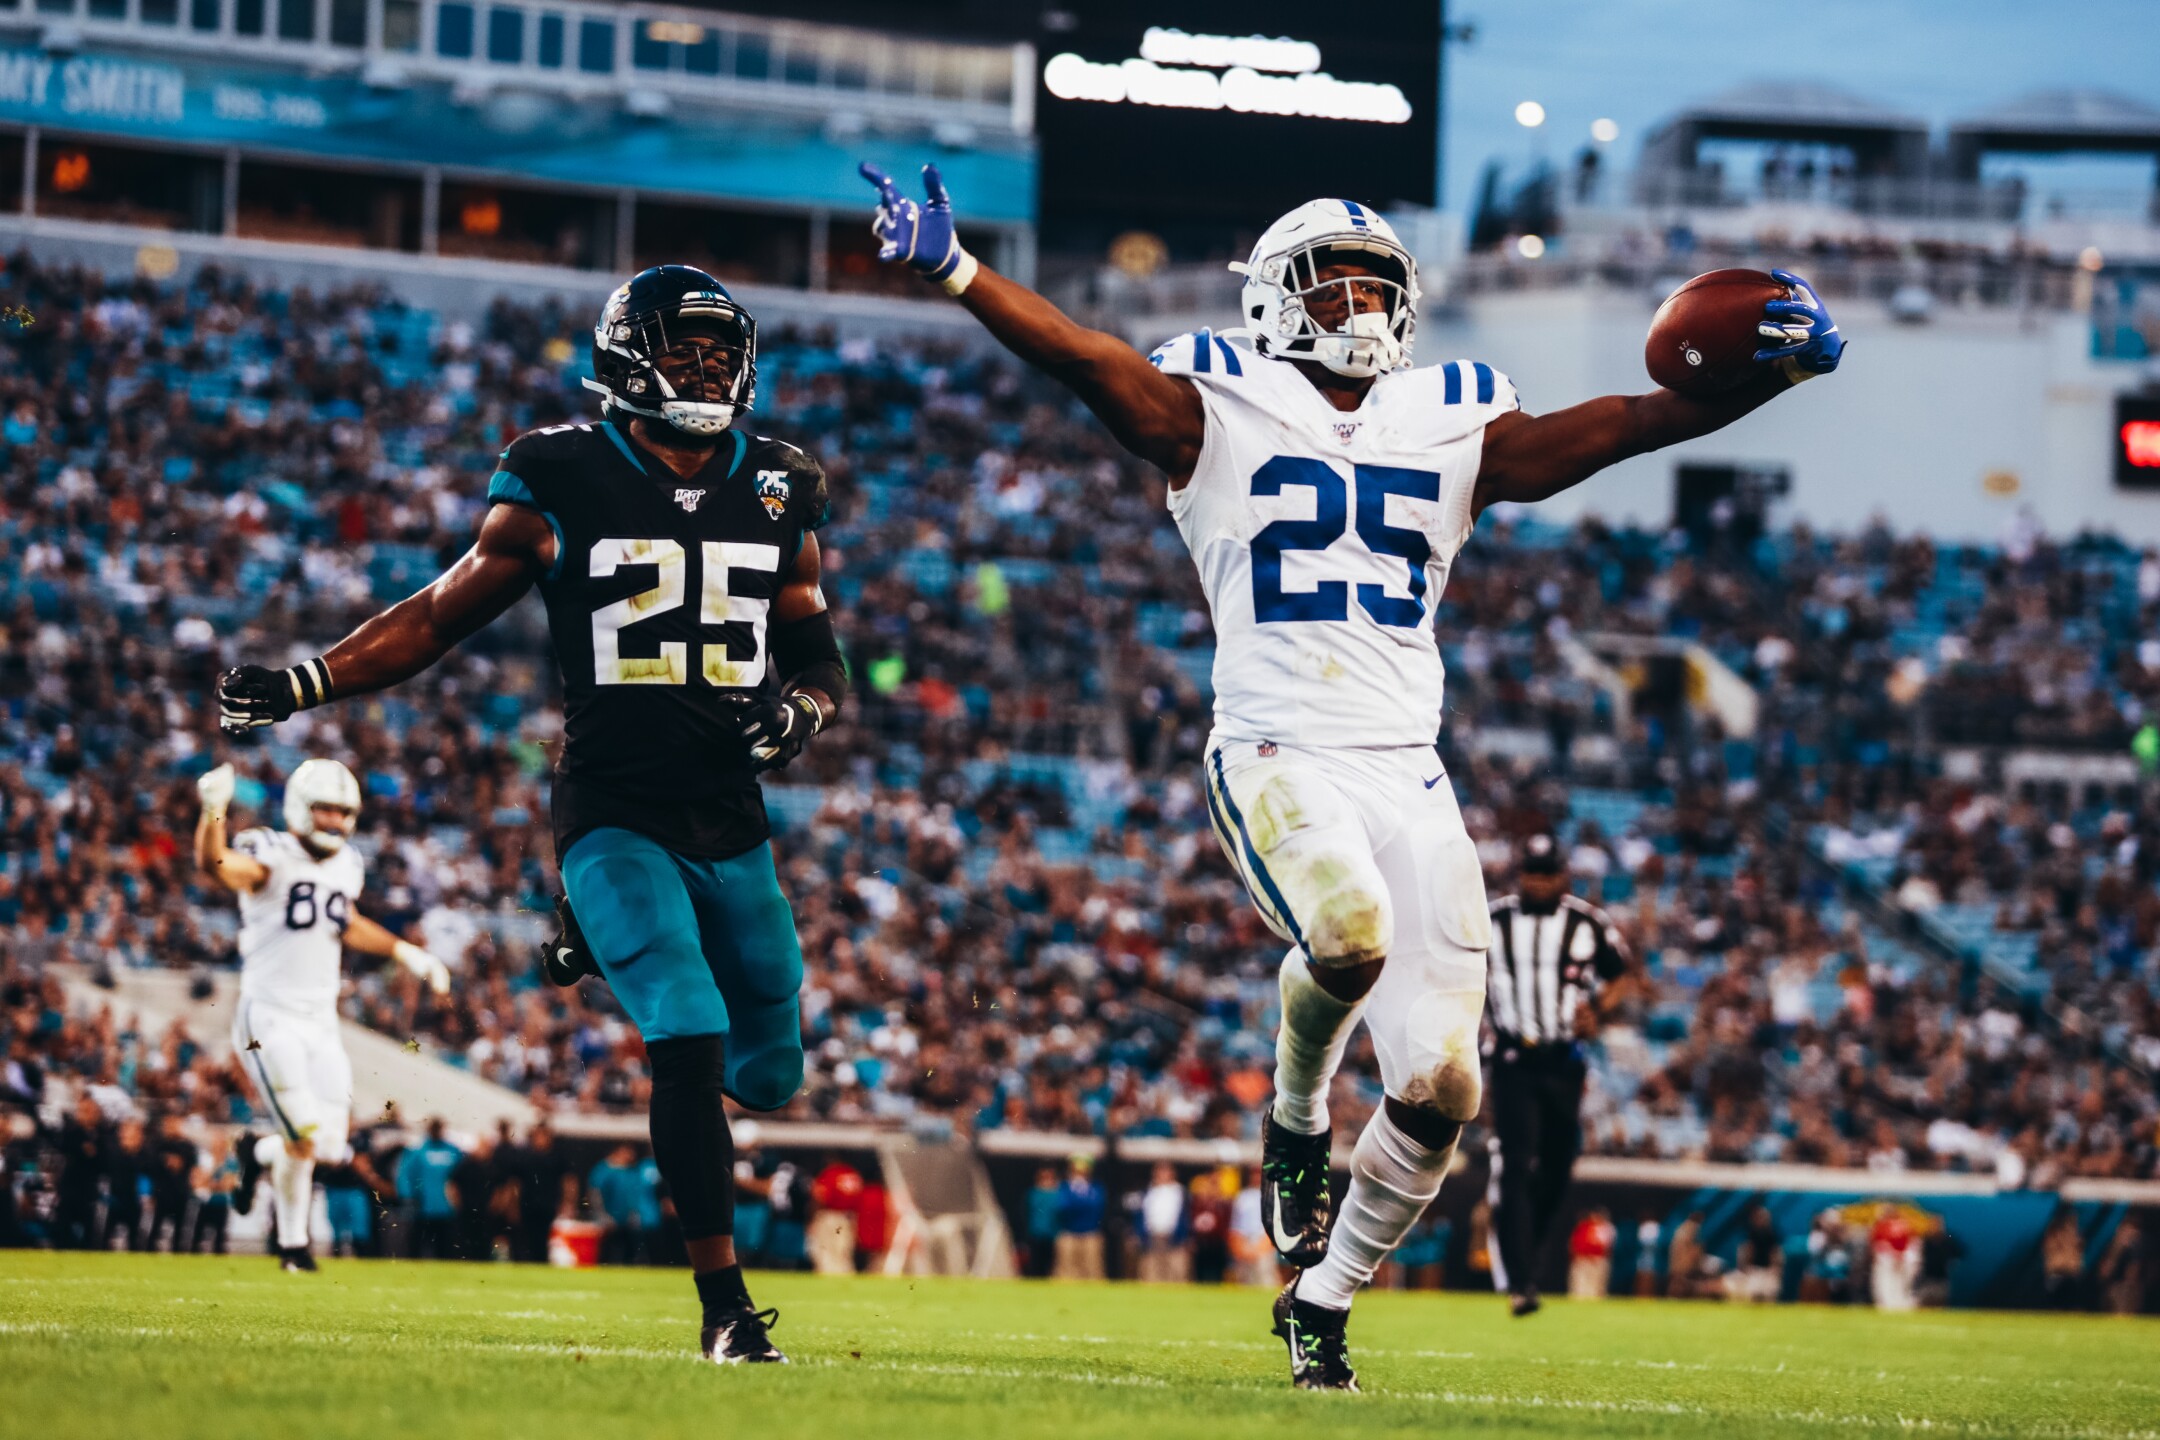 Jacksonville Jaguars at Indianapolis Colts